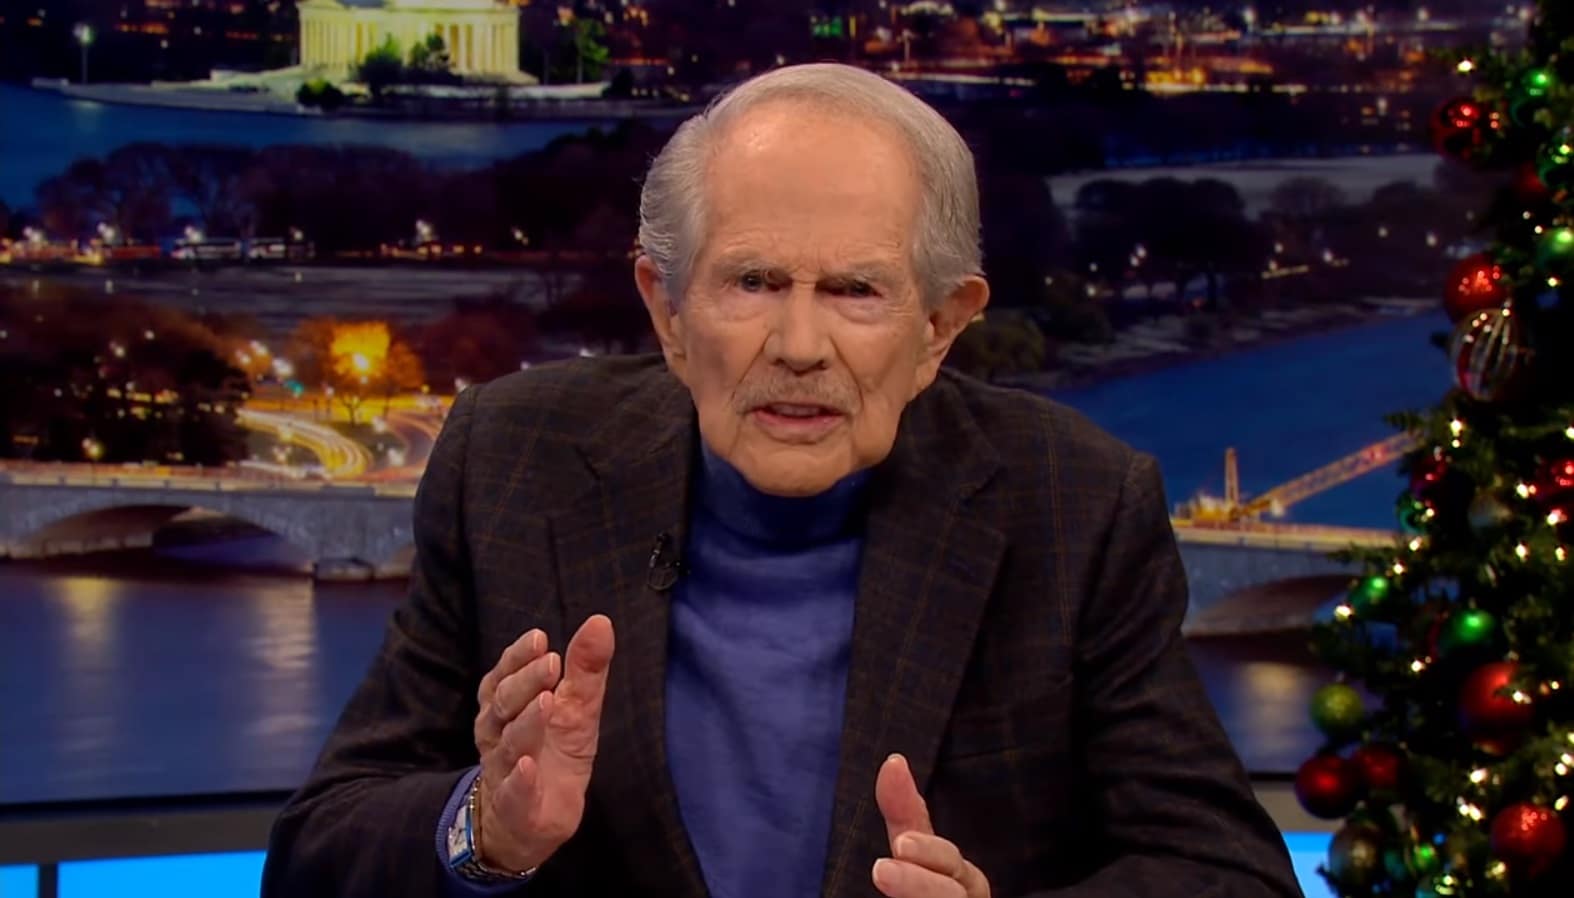 Anti-LGBT+ televangelist Pat Robertson vowed to stop Donald Trump's exit from office